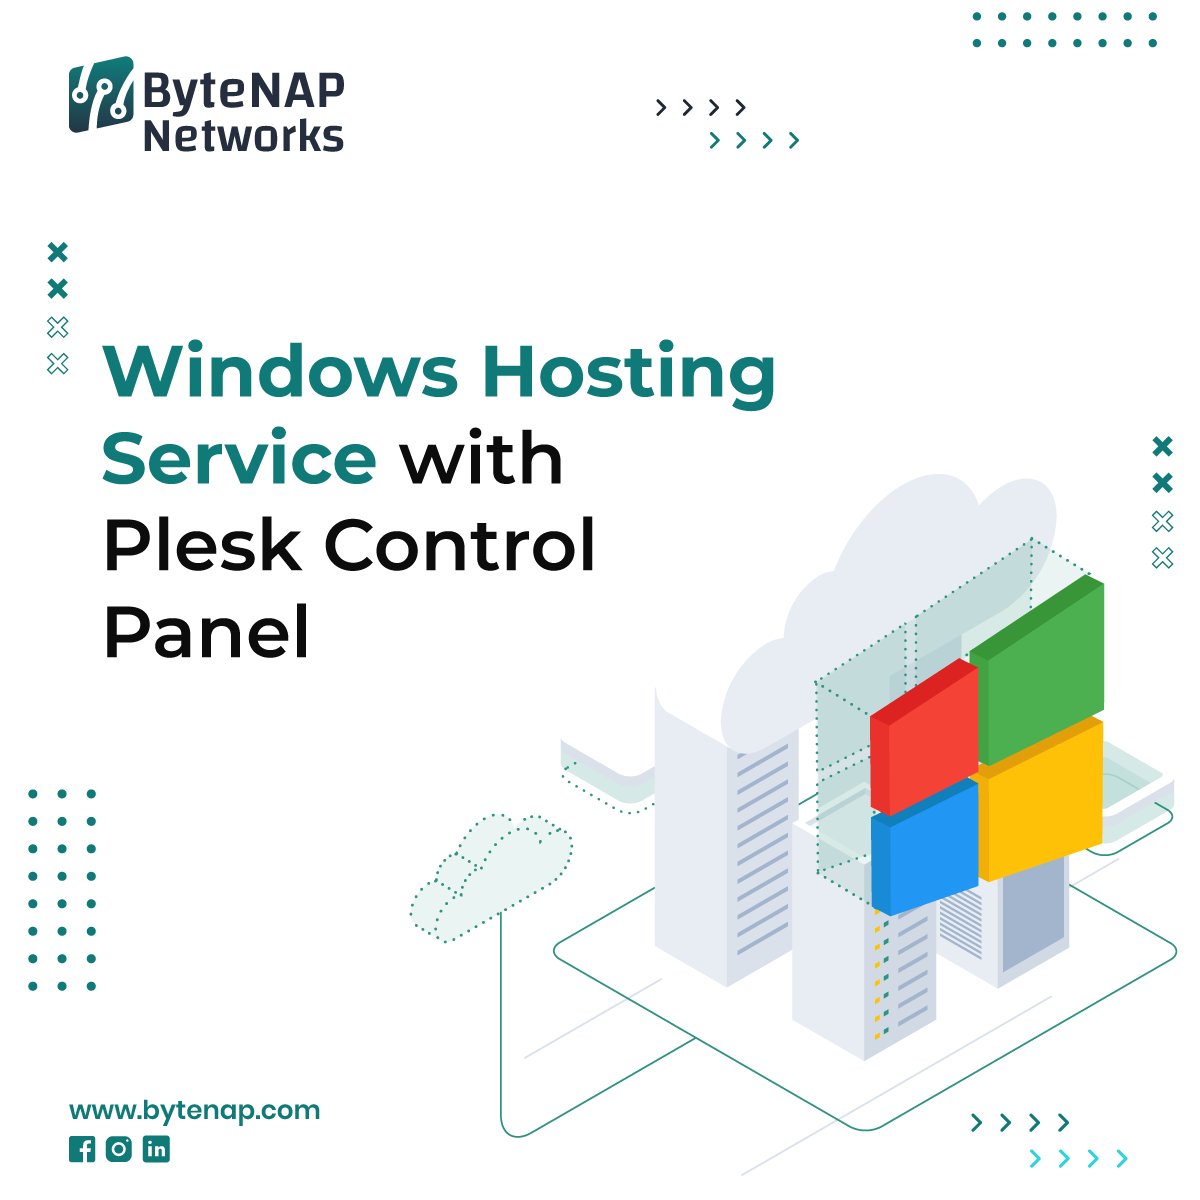 Buy the Best Windows Hosting Service from us at Affordable Rates

bytenap.com/web-hosting/wi…

#windowshosting #hosting #webhosting #website #server #ByteNAPNetworksLLC #webhostingservices #webhostingprovider #webhostingcompany #usa